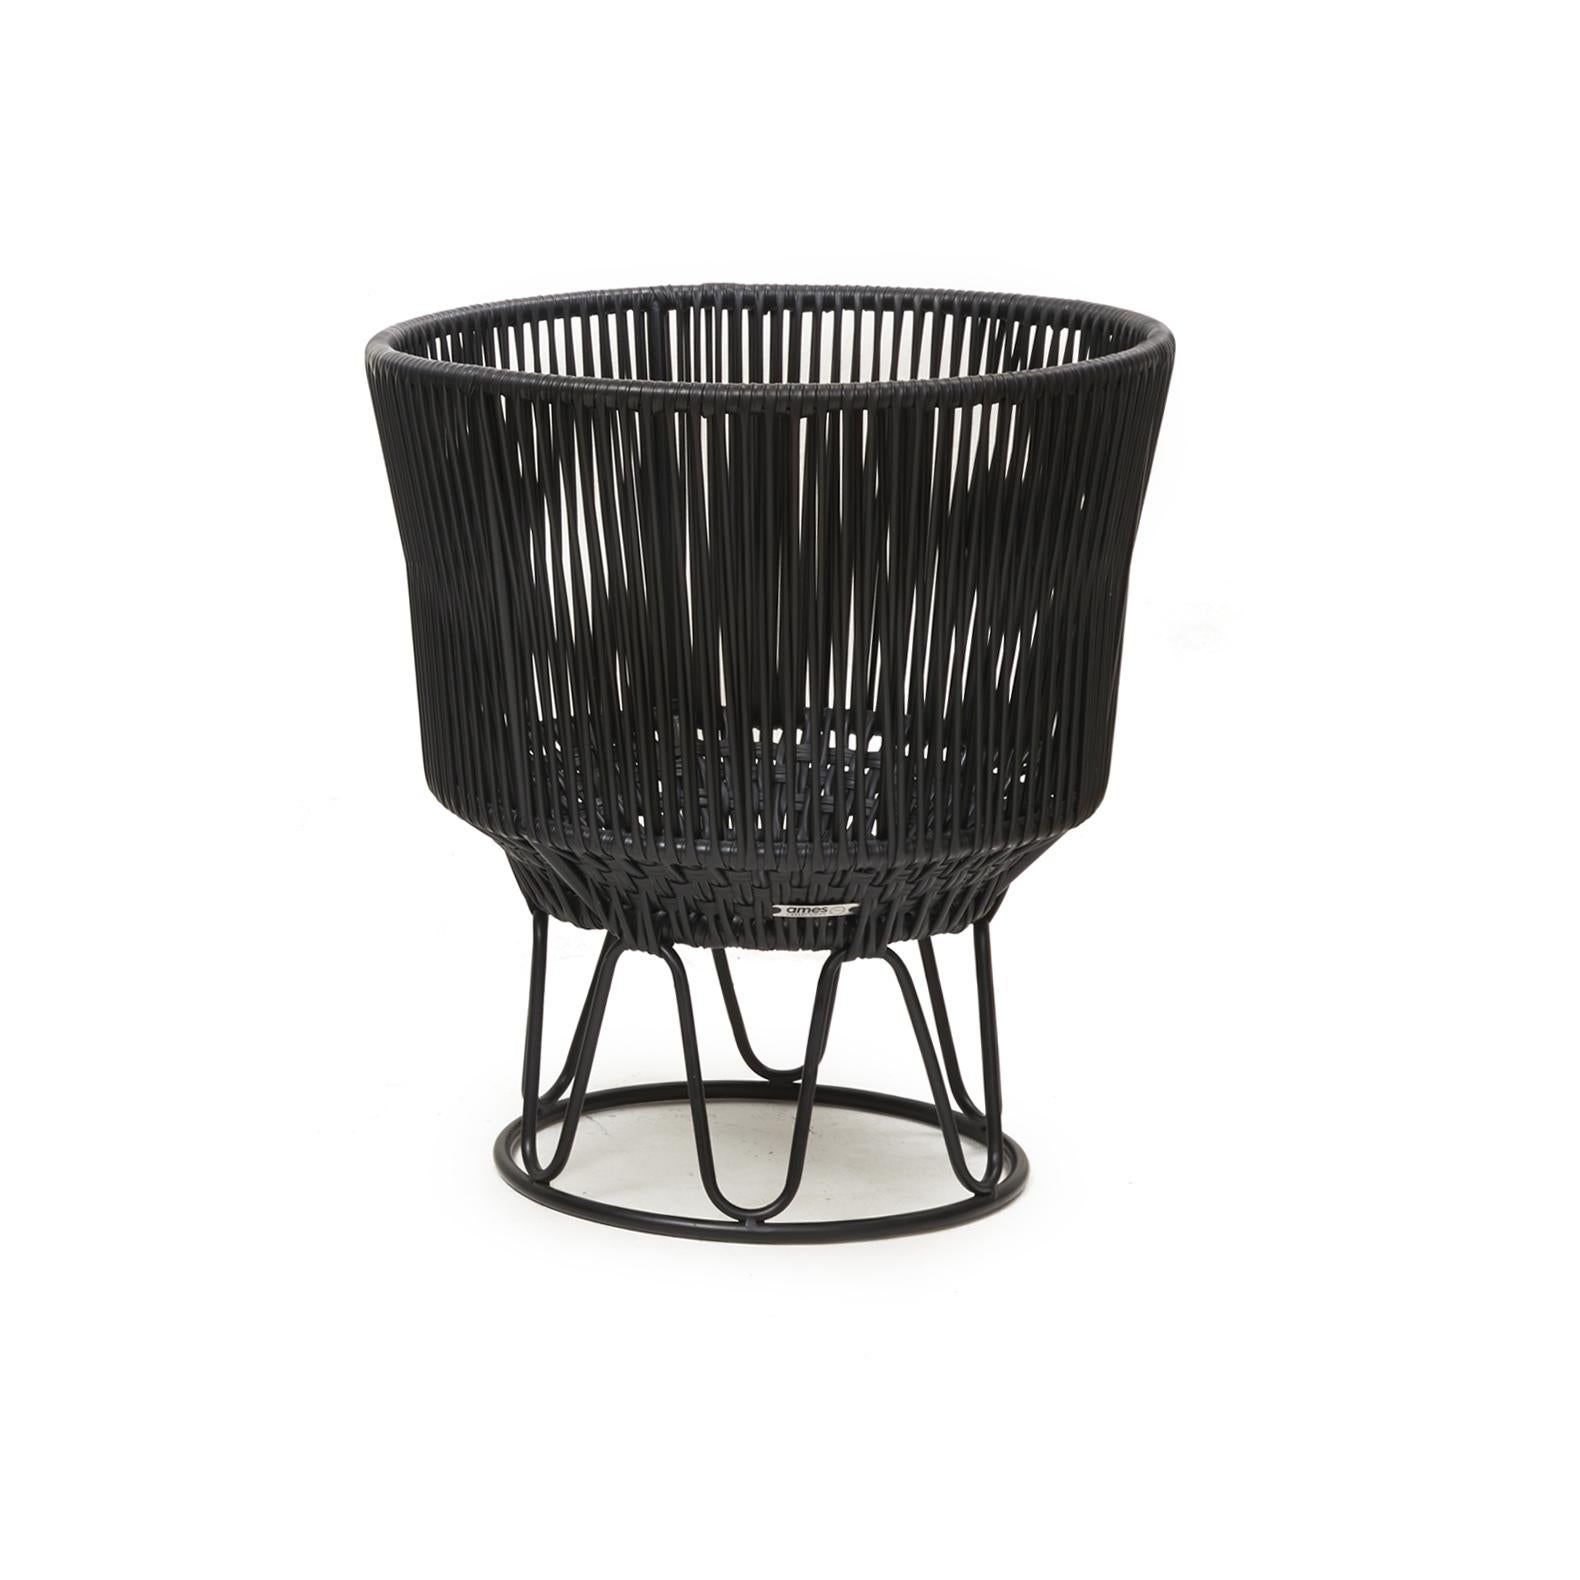 Black Circo flower pot 3 by Sebastian Herkner.
Materials: Galvanized and powder-coated tubular steel. PVC strings.
Technique: Made from recycled plastic. Weaved by local craftspeople in Colombia. 
Dimensions: 
Top diameter 50 x height 56.5 cm